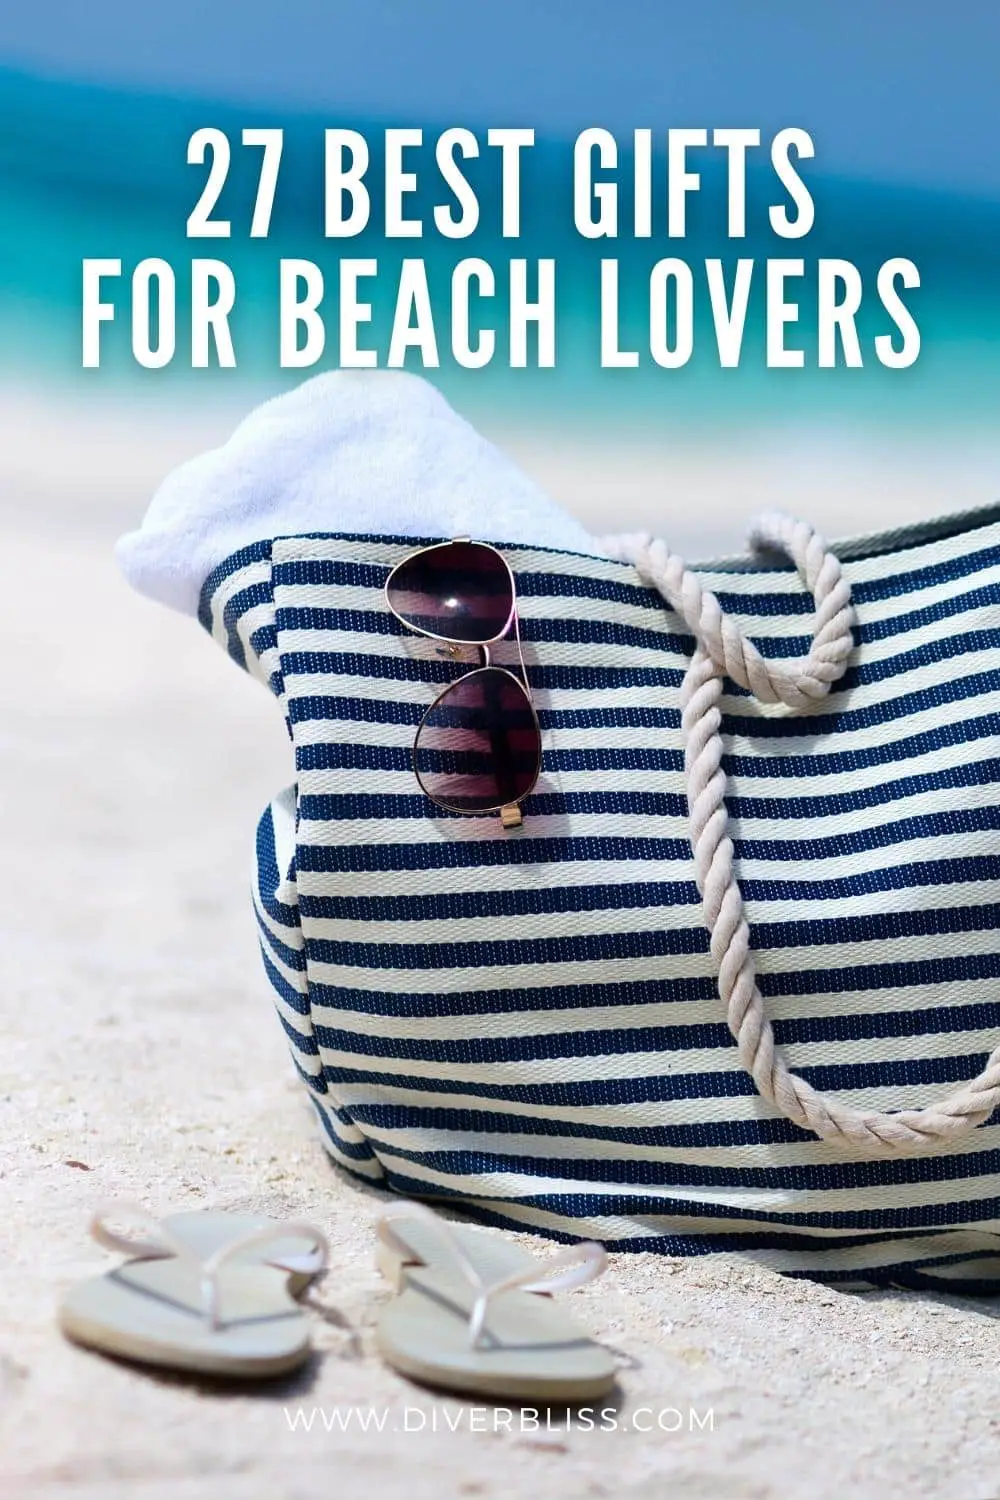 27 Best Gifts for Beach Lovers